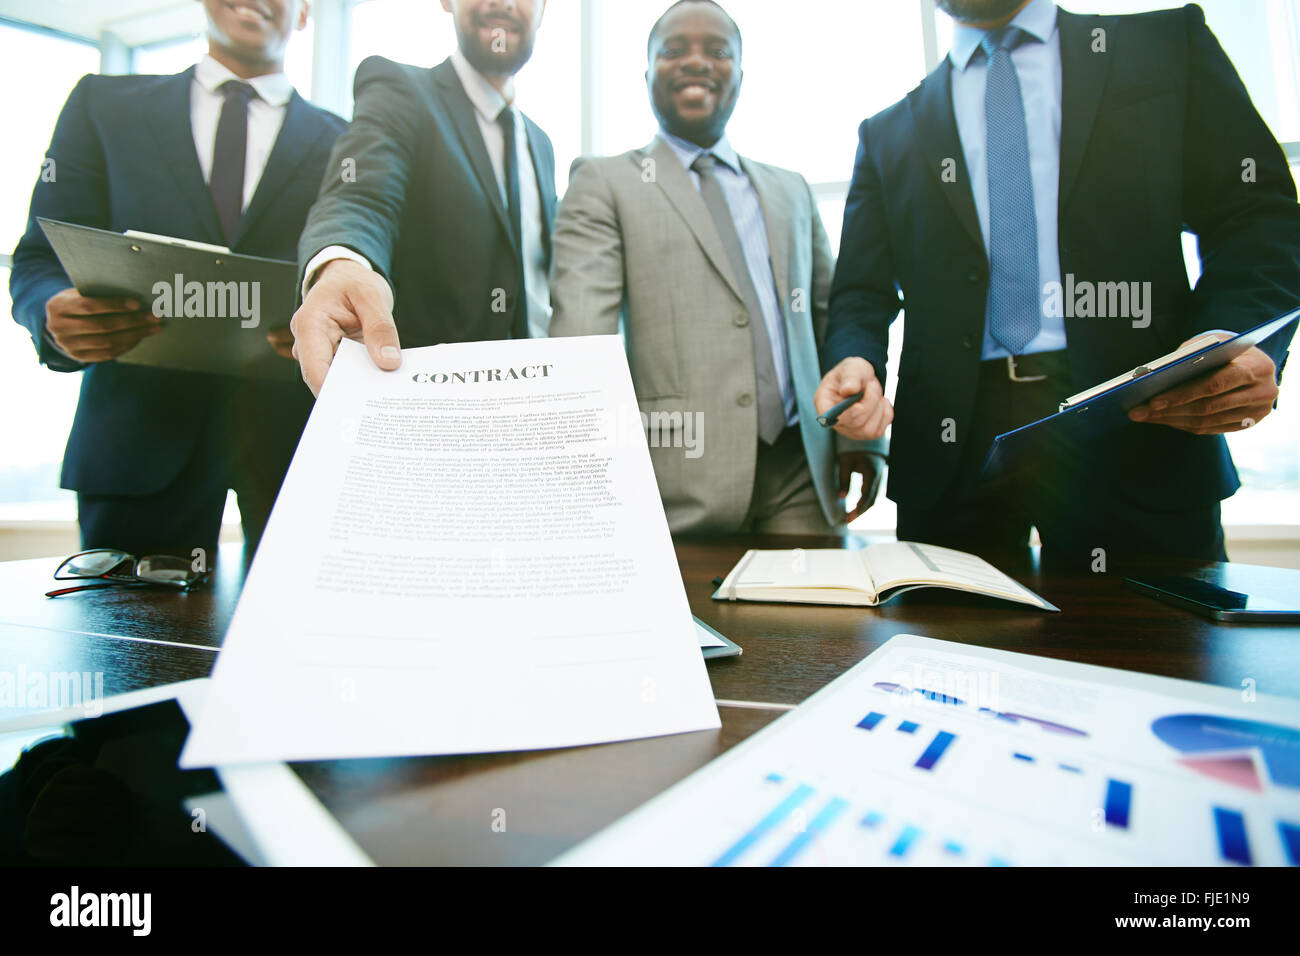 Business group suggesting you to sign a contract Stock Photo